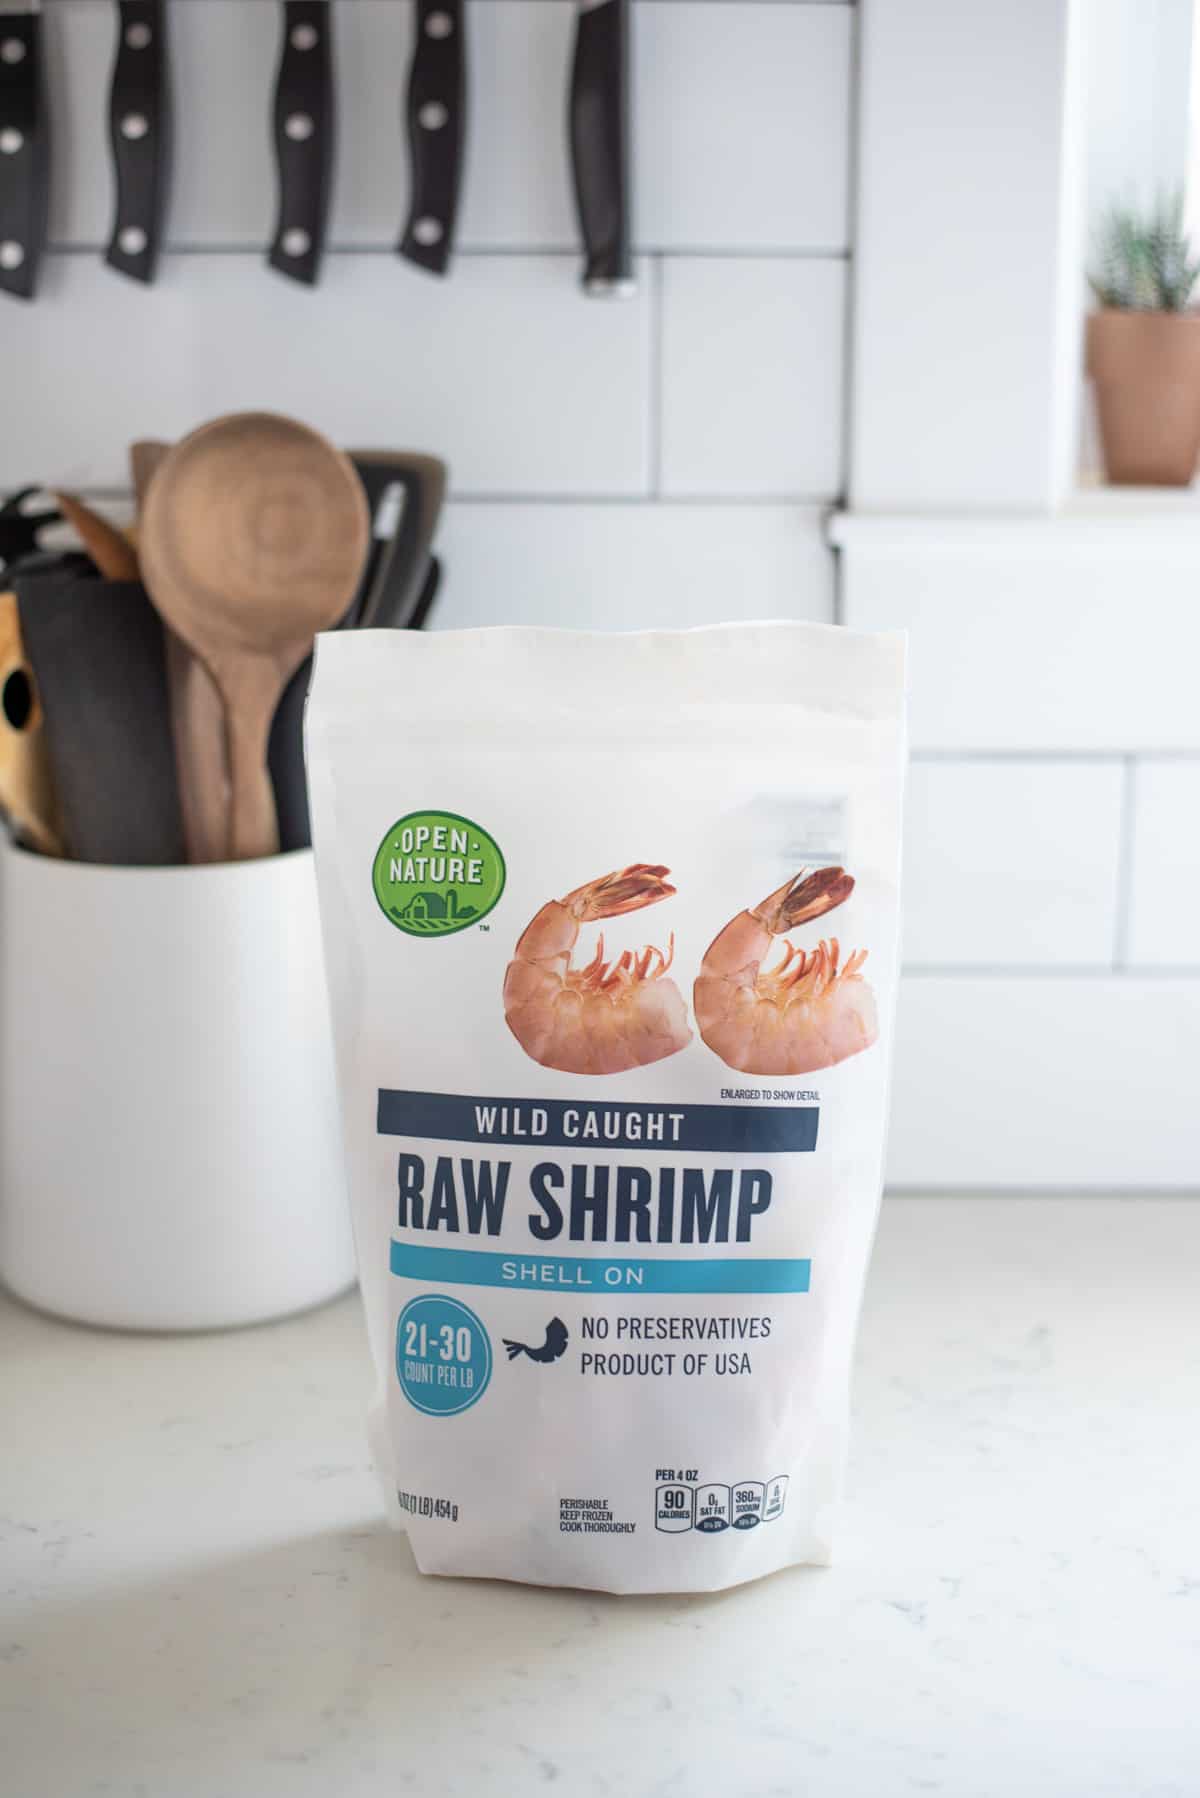 A bag of Open Nature Raw shrimp placed on a counter with utensils in the background.